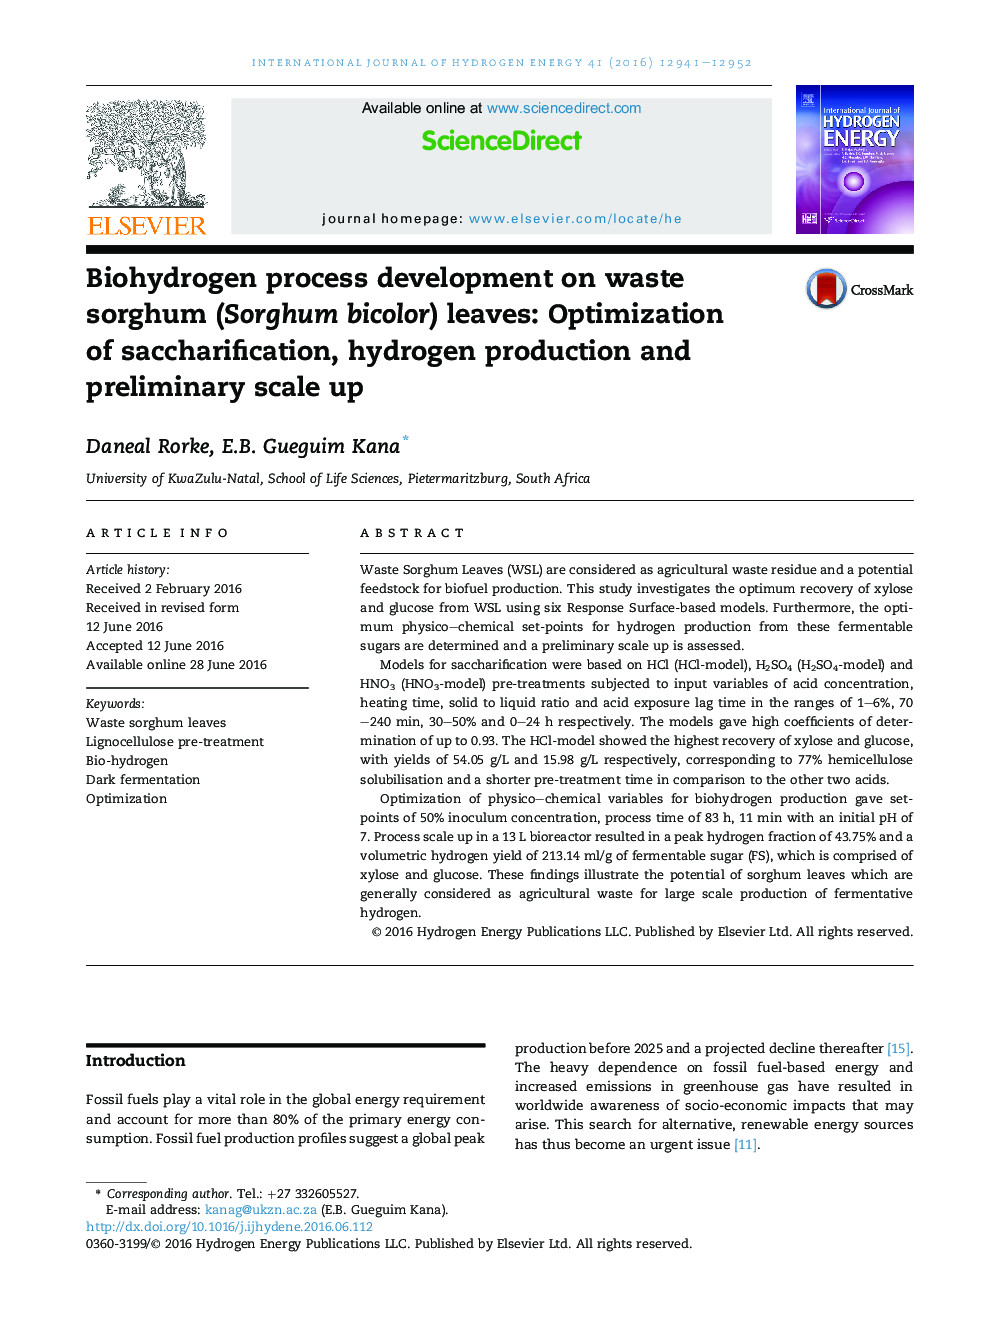 Biohydrogen process development on waste sorghum (Sorghum bicolor) leaves: Optimization of saccharification, hydrogen production and preliminary scale up